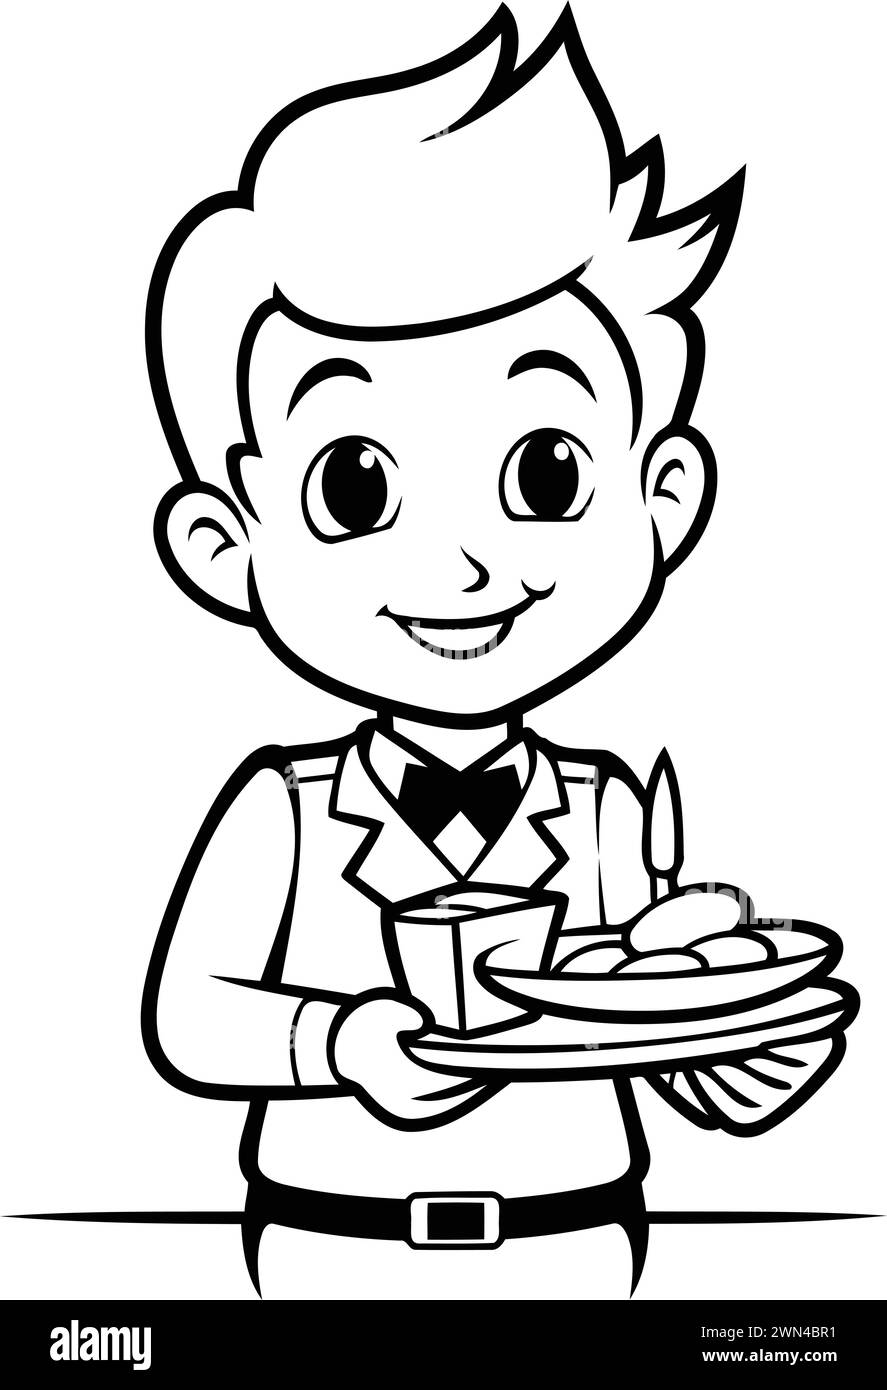 Cartoon waiter holding a tray of food - Black and White Vector Illustration Stock Vector